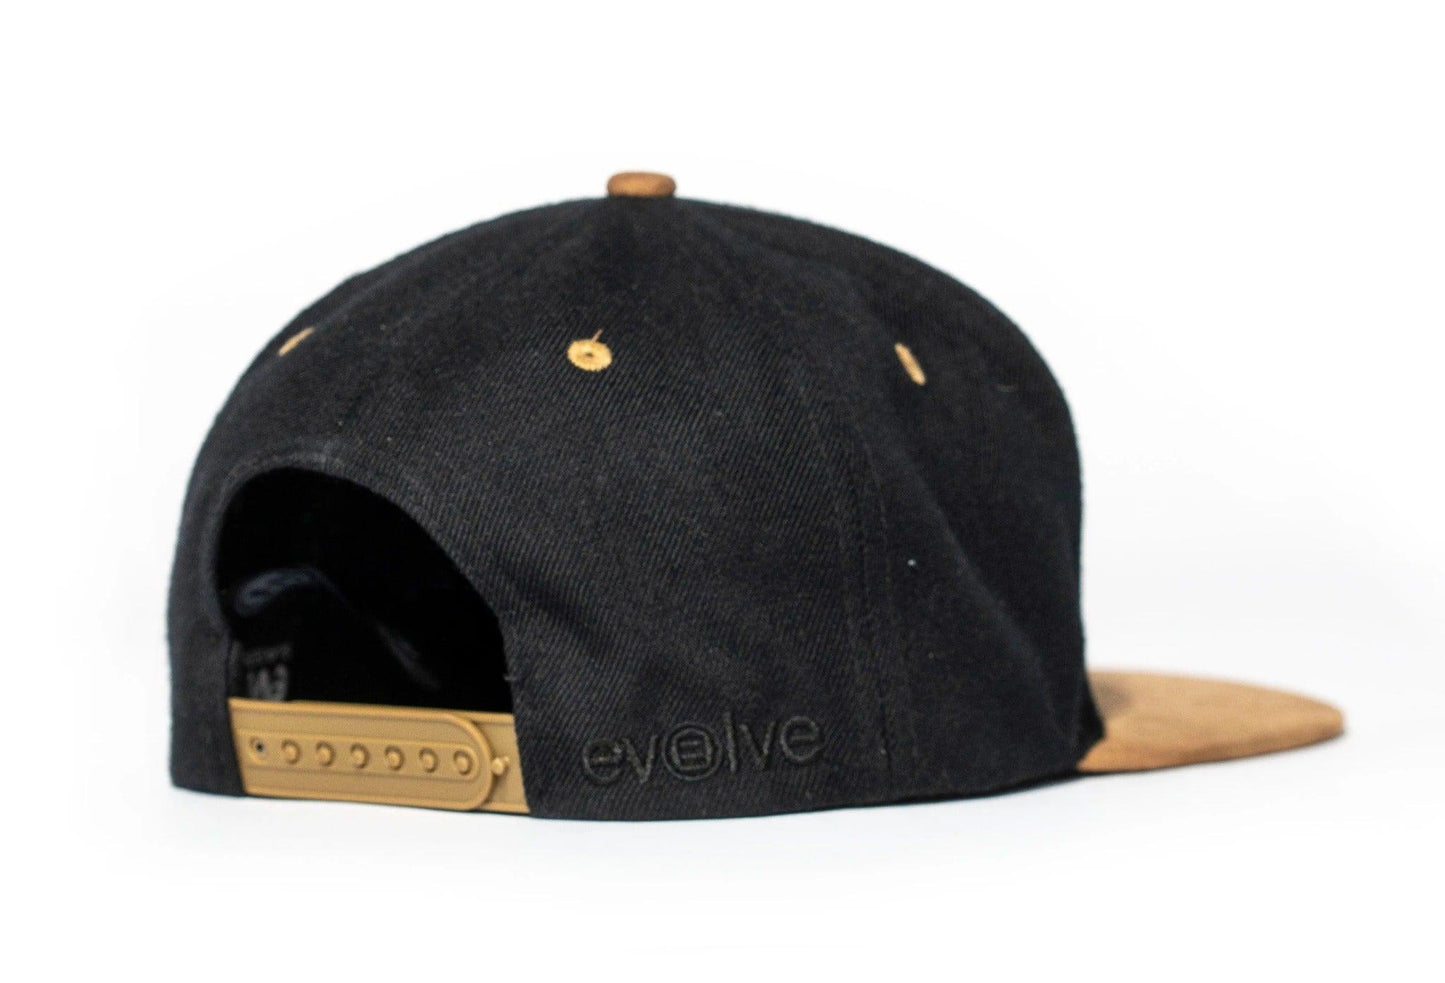 Evolve Patch Hat - Apparel & Accessories - Apparel - Electric Monkey NZ